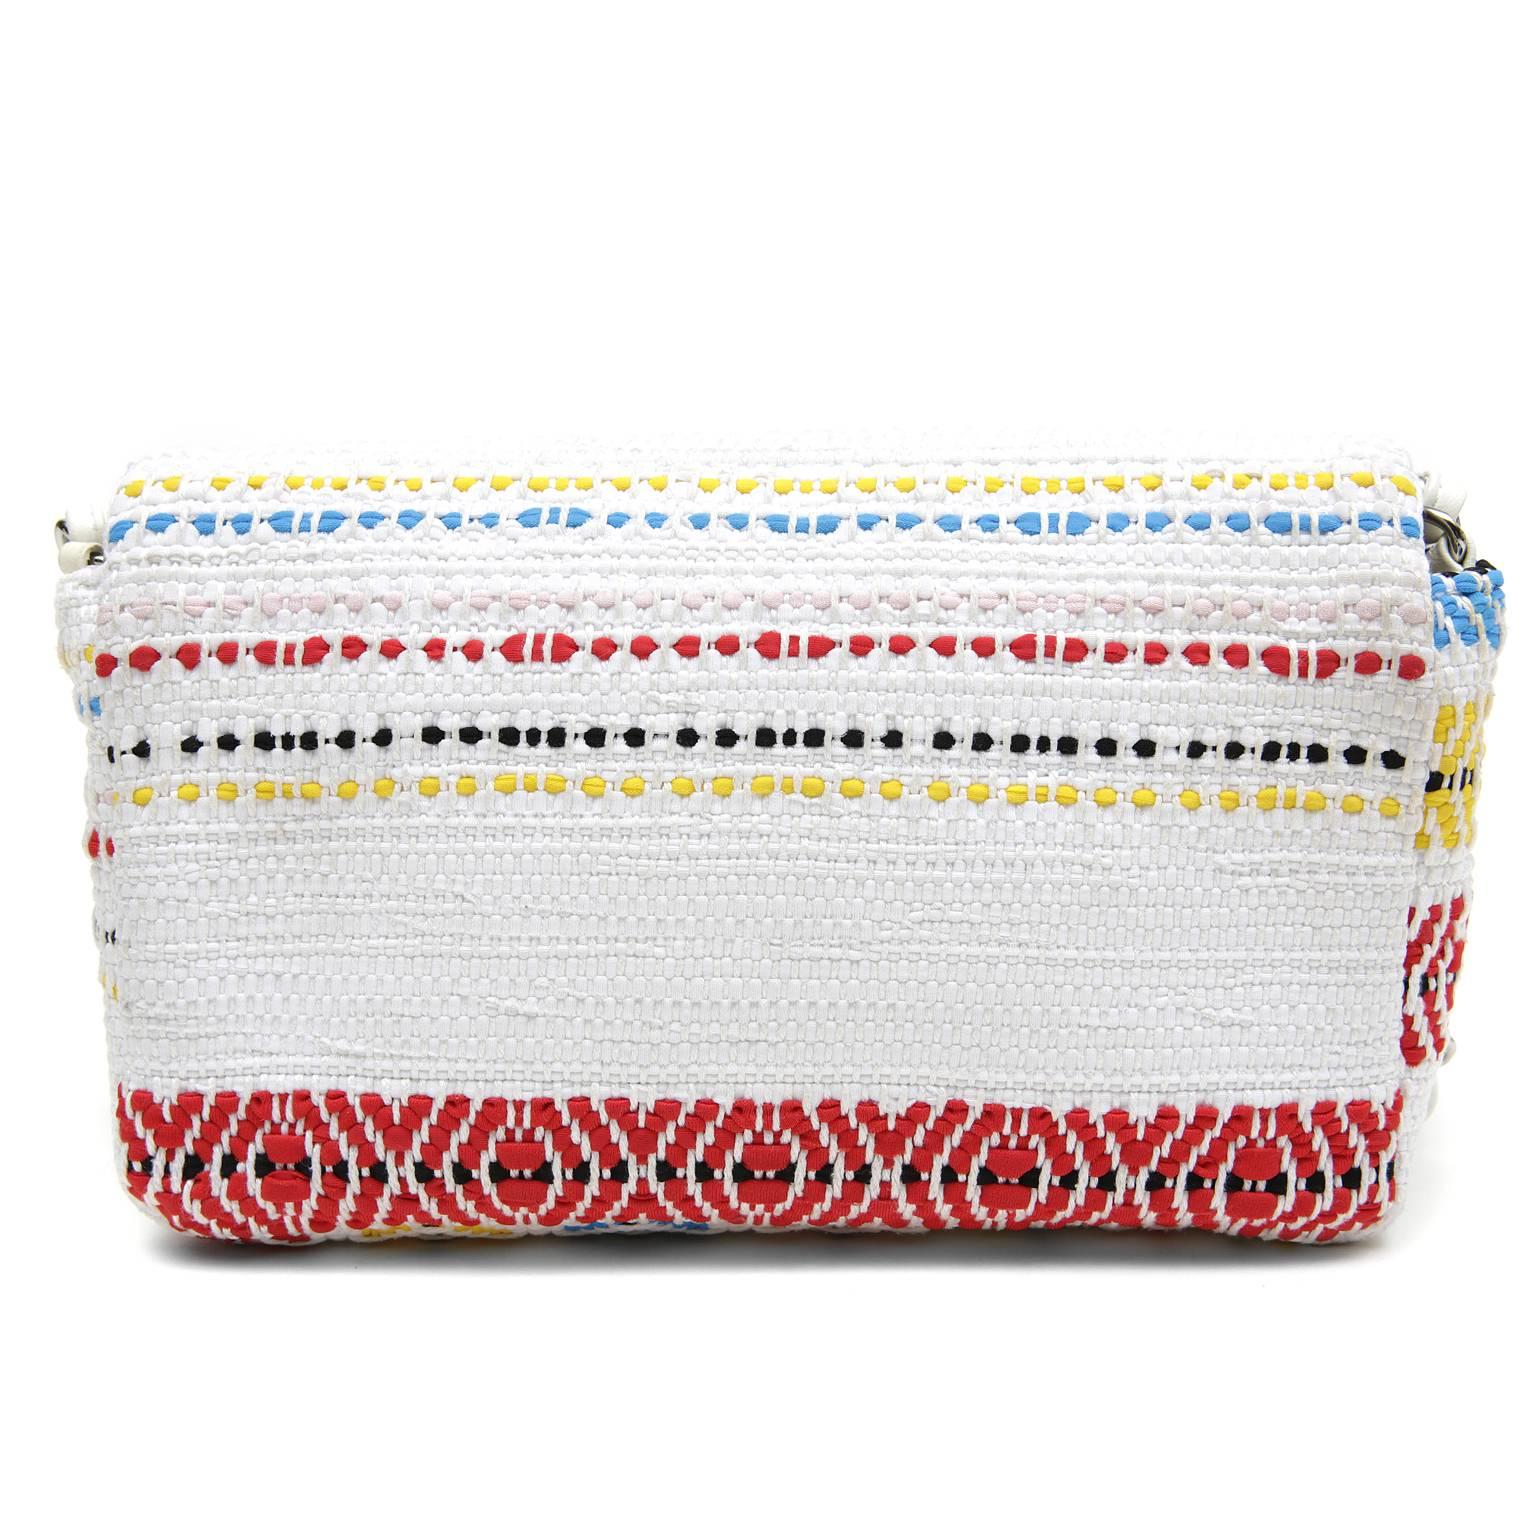 Chanel White Multicolor Woven Flap Bag - EXCELLENT PLUS
 Uniquely patterned in a soft tribal print with happy colors, this charming Chanel is a must have on any holiday or summer getaway.  
White woven fabric is striped in shades of bright blue,